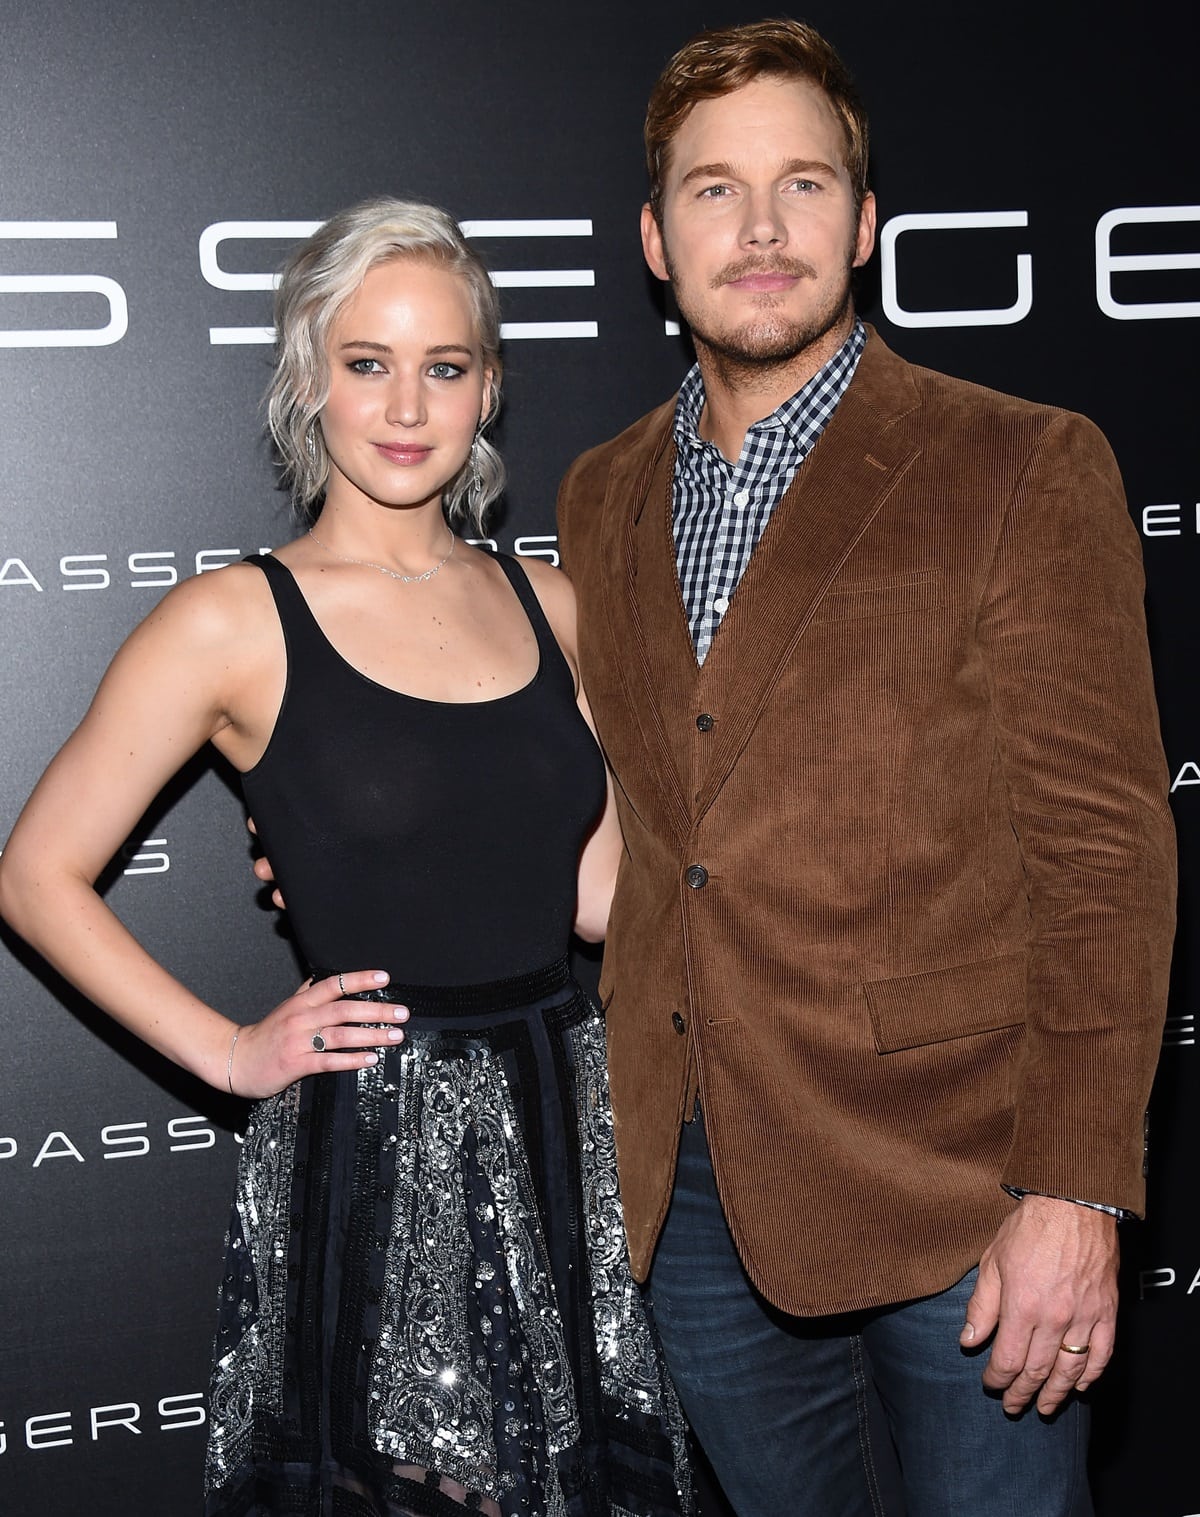 Chris Pratt towers over Jennifer Lawrence with a notable height difference, as he stands at 6'1.75